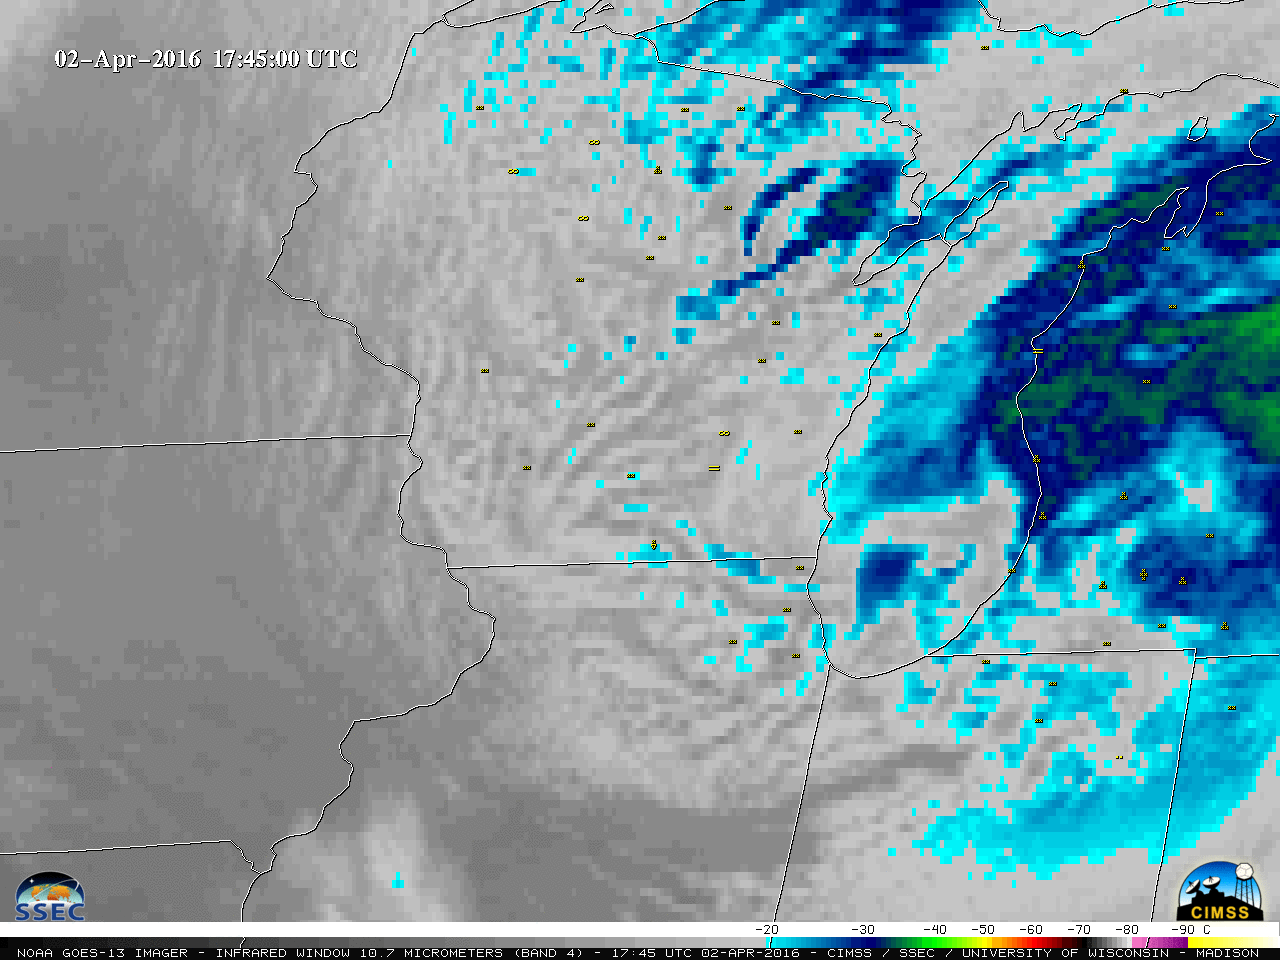 GOES-13 Infrared Window (10.7 µm) images, with hourly surface weather symbols [click to play animation]